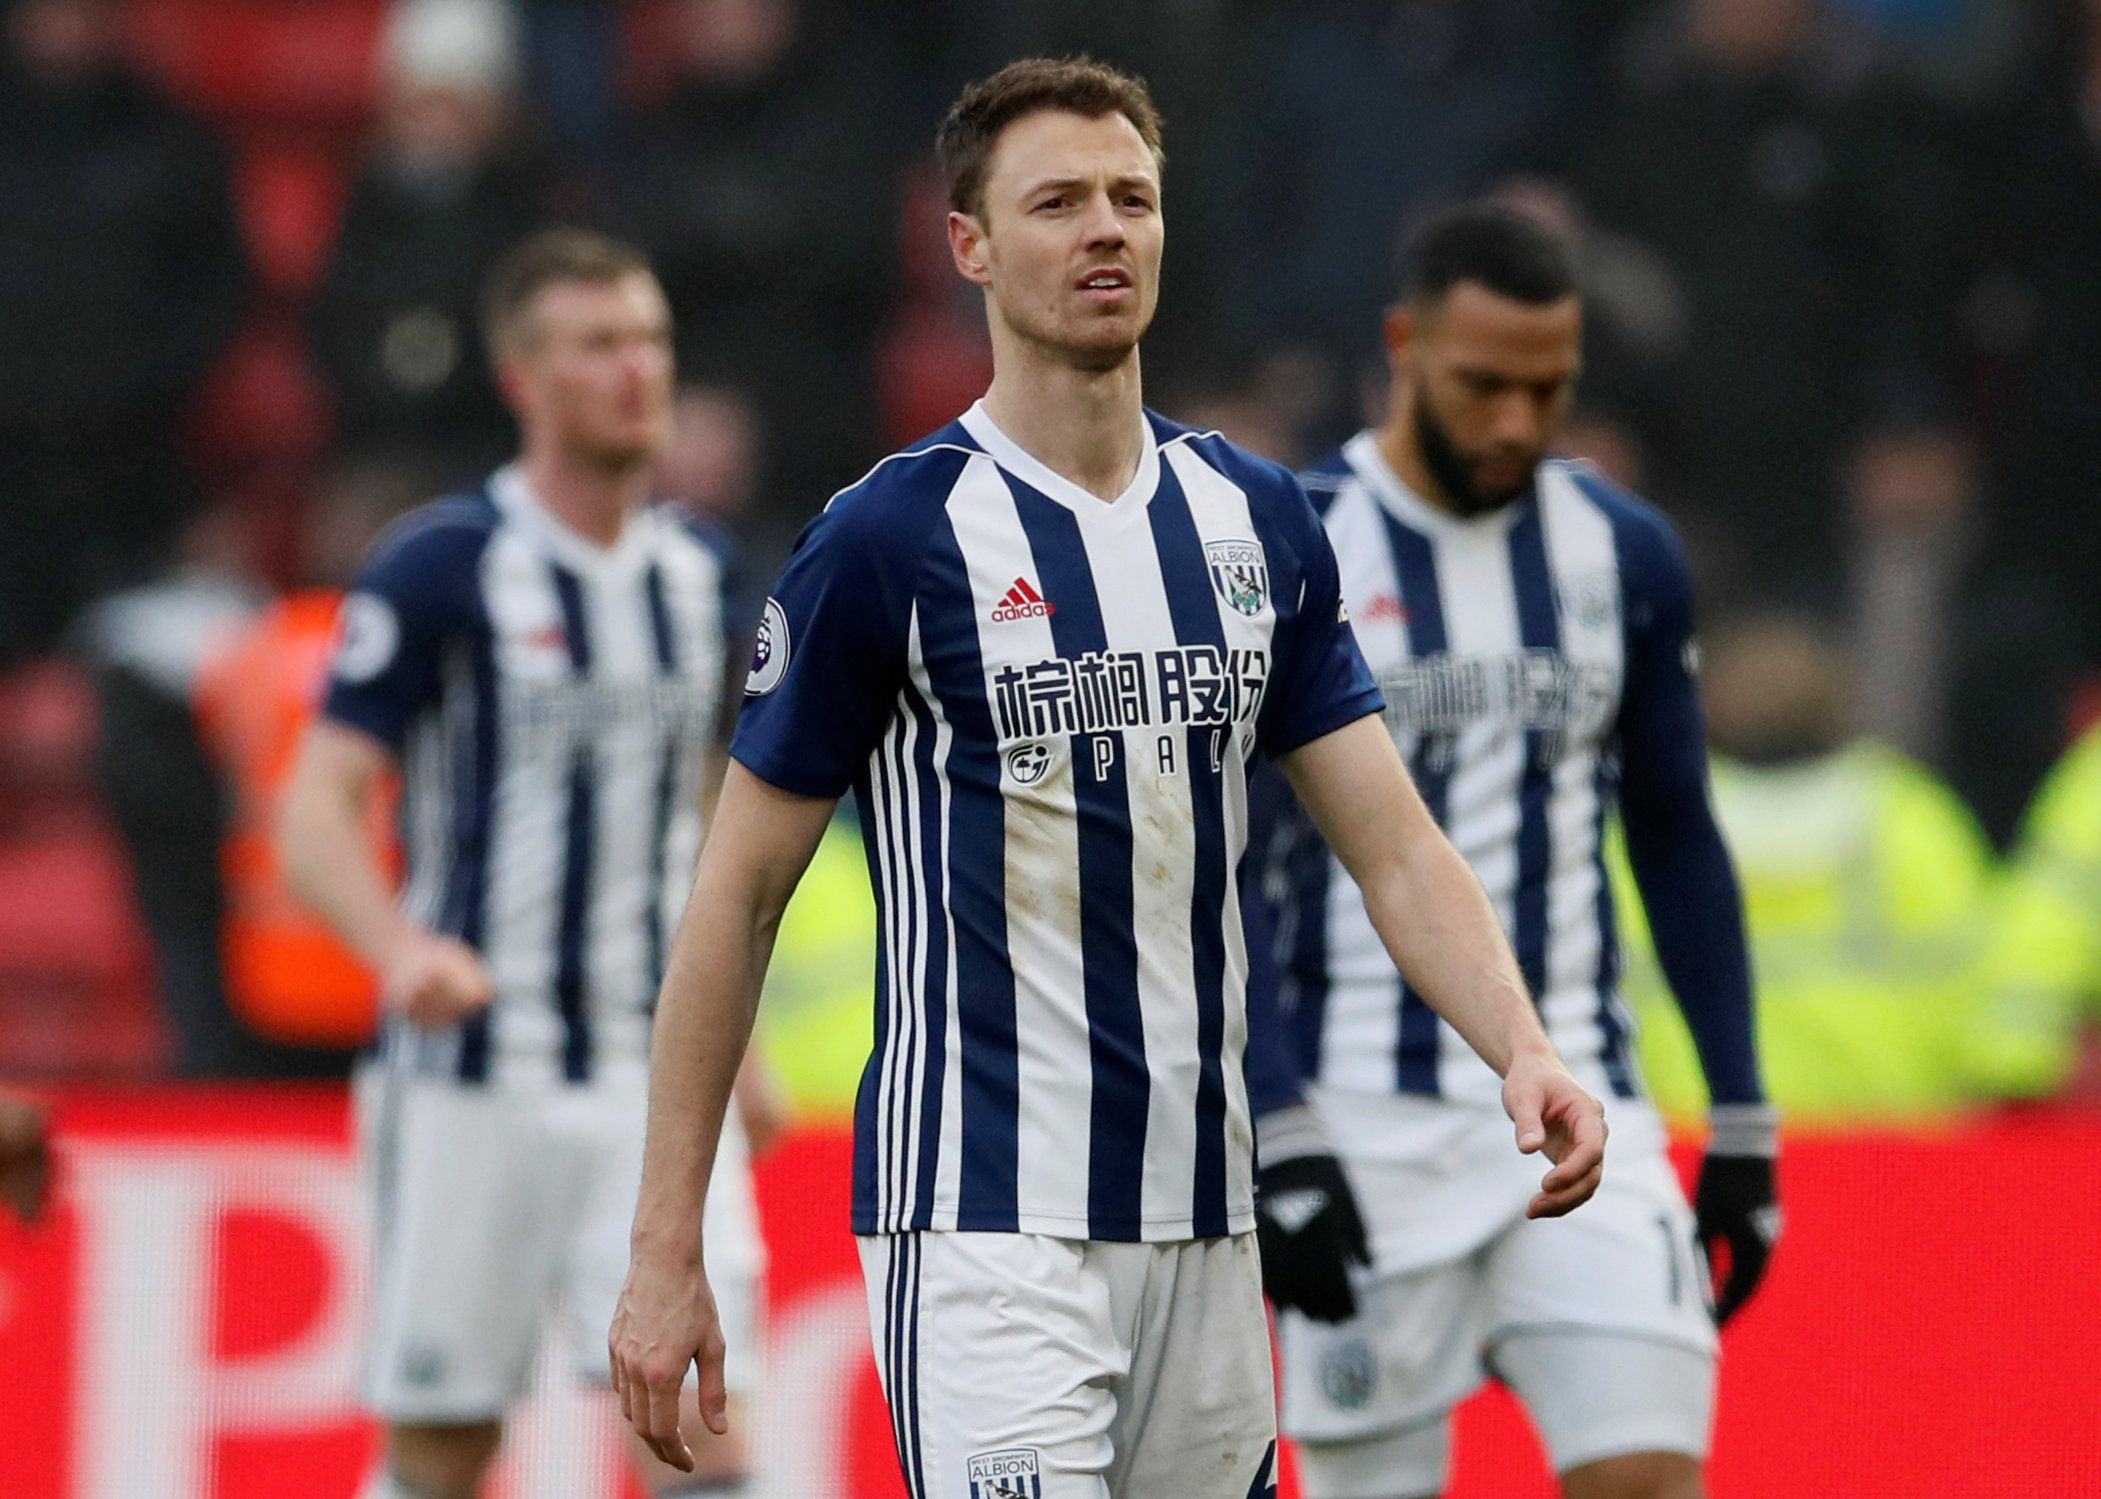 Soccer Football - Premier League - Watford vs West Bromwich Albion - Vicarage Road, Watford, Britain - March 3, 2018   West Bromwich Albion's Jonny Evans looks dejected after the match                    REUTERS/David Klein    EDITORIAL USE ONLY. No use with unauthorized audio, video, data, fixture lists, club/league logos or "live" services. Online in-match use limited to 75 images, no video emulation. No use in betting, games or single club/league/player publications.  Please contact your acco